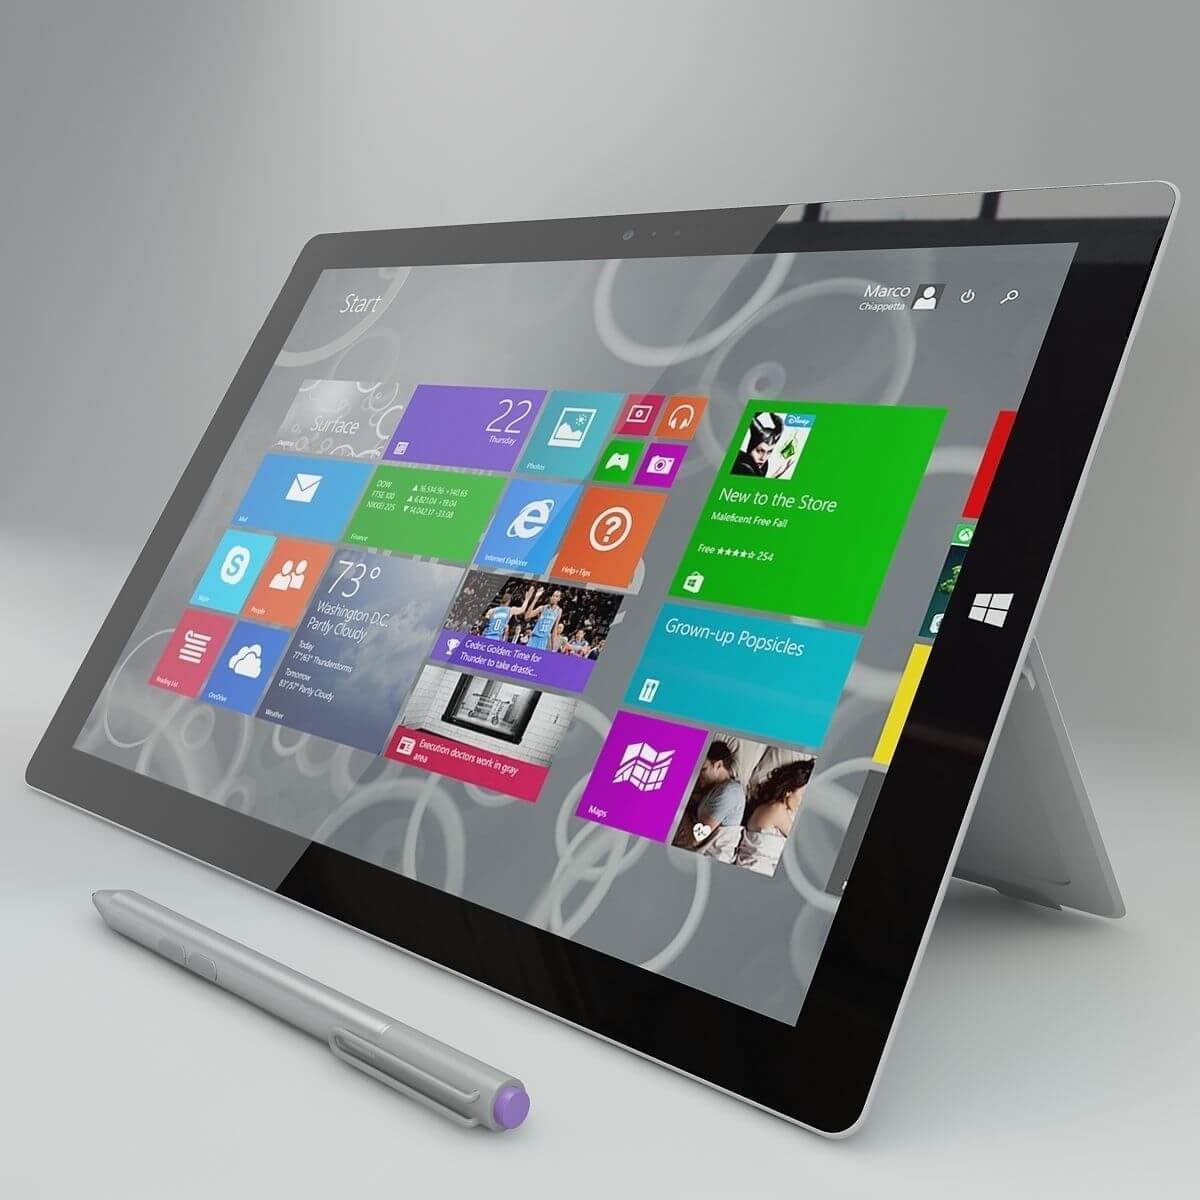 Microsoft Surface Pro 3 and Surface Dock firmware released